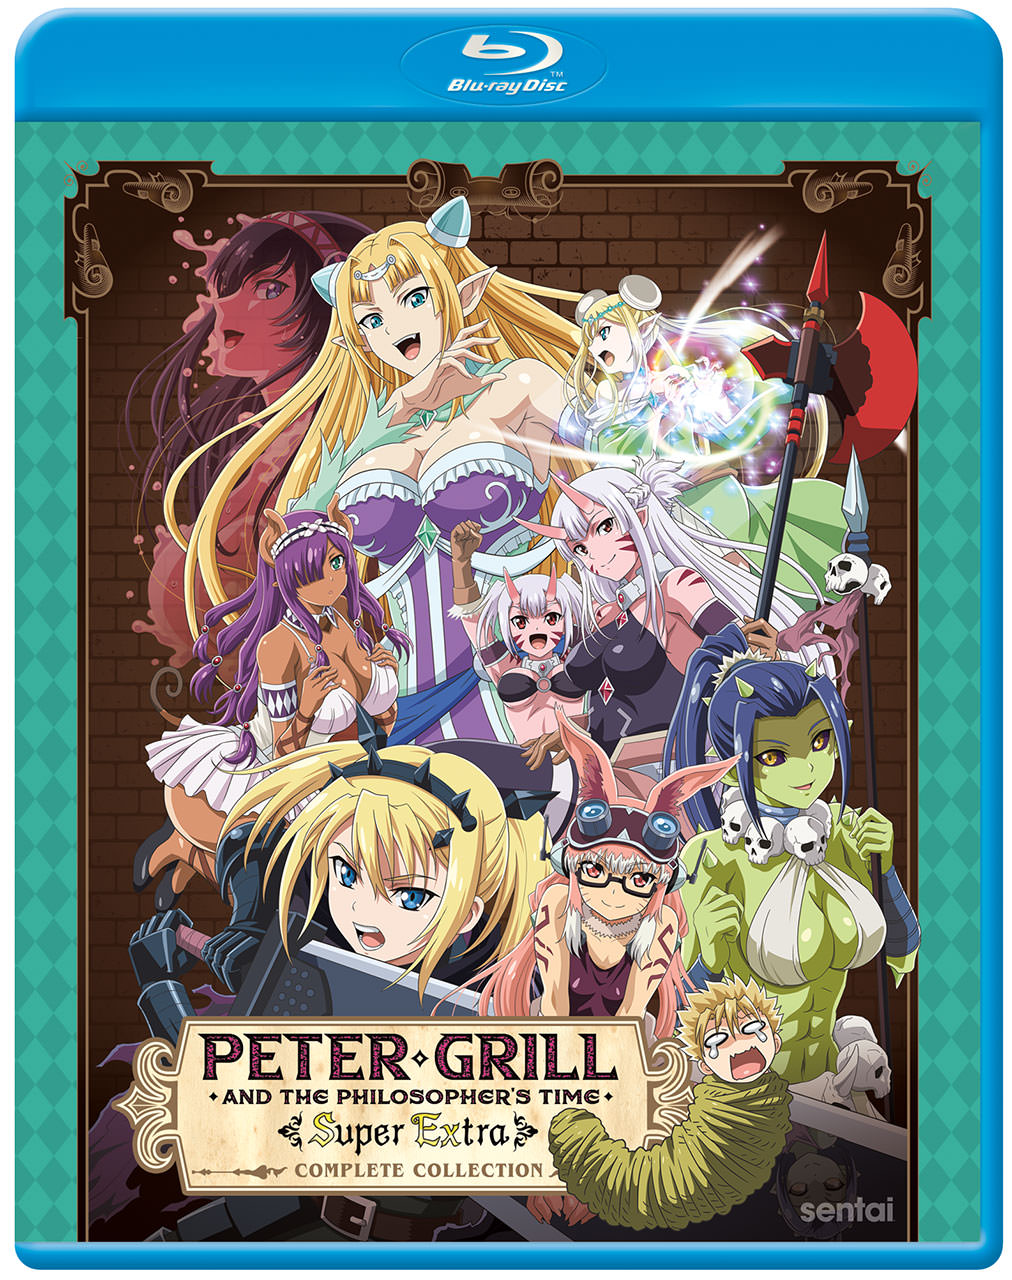 'Peter Grill And The Philosopher's Time' Blu-ray Cover Art provided by Sentai Filmworks